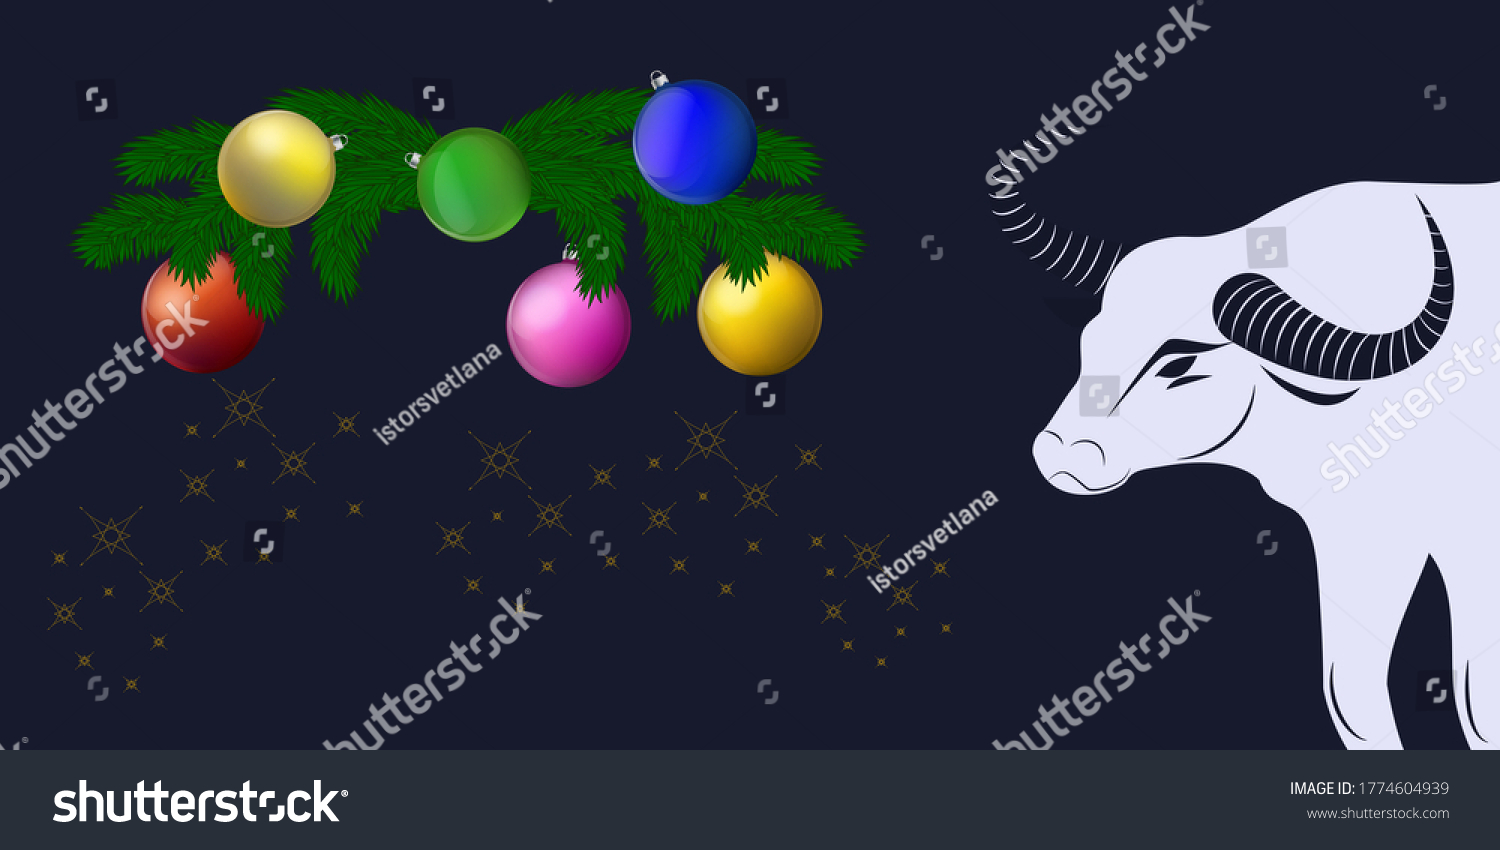 SVG of Garland of Christmas tree branches and balls, White bull with swirling horns - illustration, vector. New Year banner. Winter holidays. svg